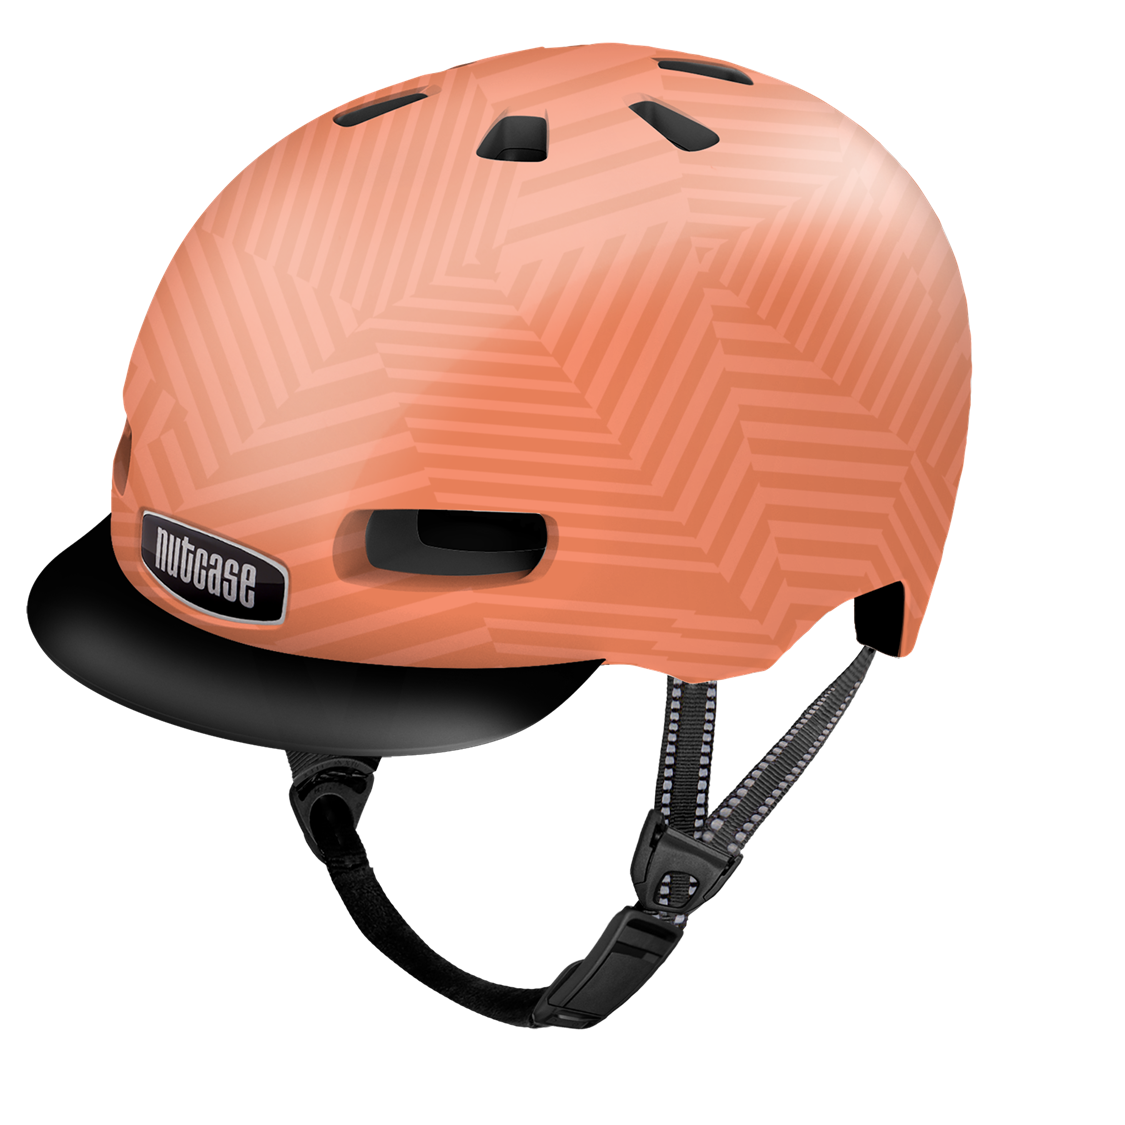 NUTCASE LITTLE NUTTY MO' PEACHES GLOSS MIPS HELMET TODDLER (48-52CM)